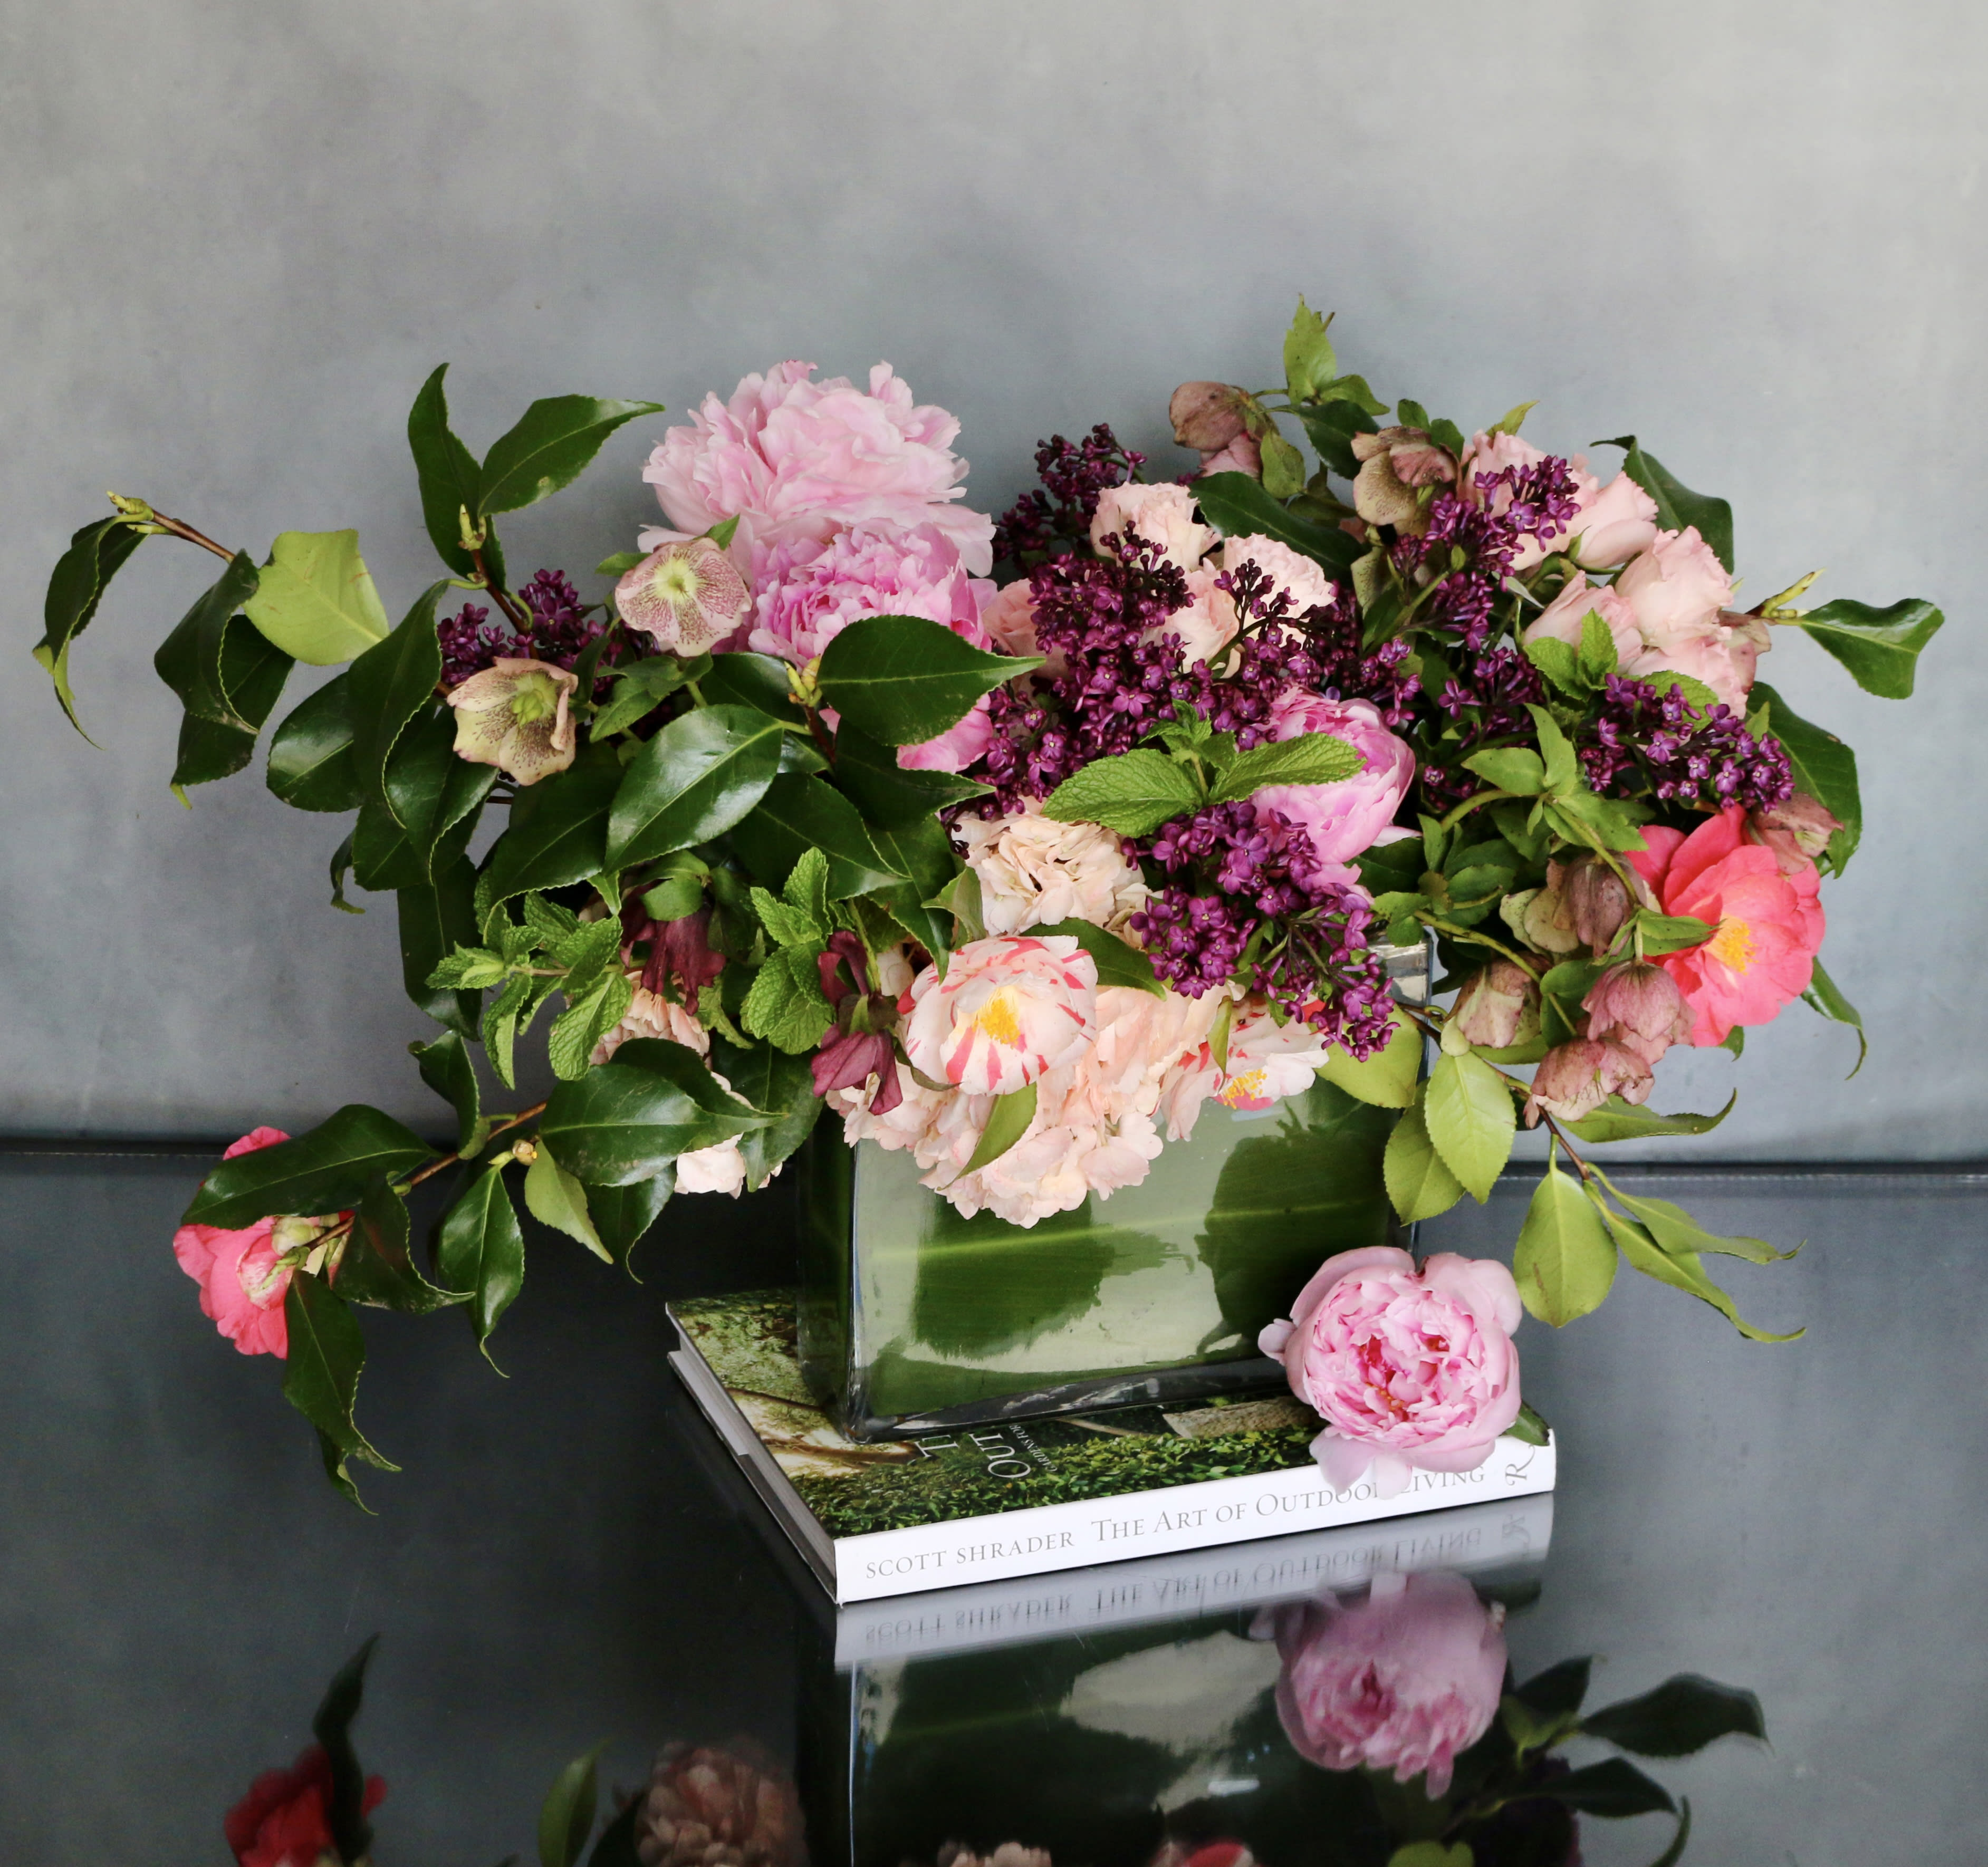 Eve's Garden  - &quot;Eve's Garden&quot; is a variety of pink florals, such as, Pink Peonies, Hellebores, Lilacs, Pink Hydrangeas and other delicate florals. Mixed in with a variety of seasonal greens in a leaf lined glass vase.   Measurements: Vase: 9 x 10 Arrangement: 16 x 16